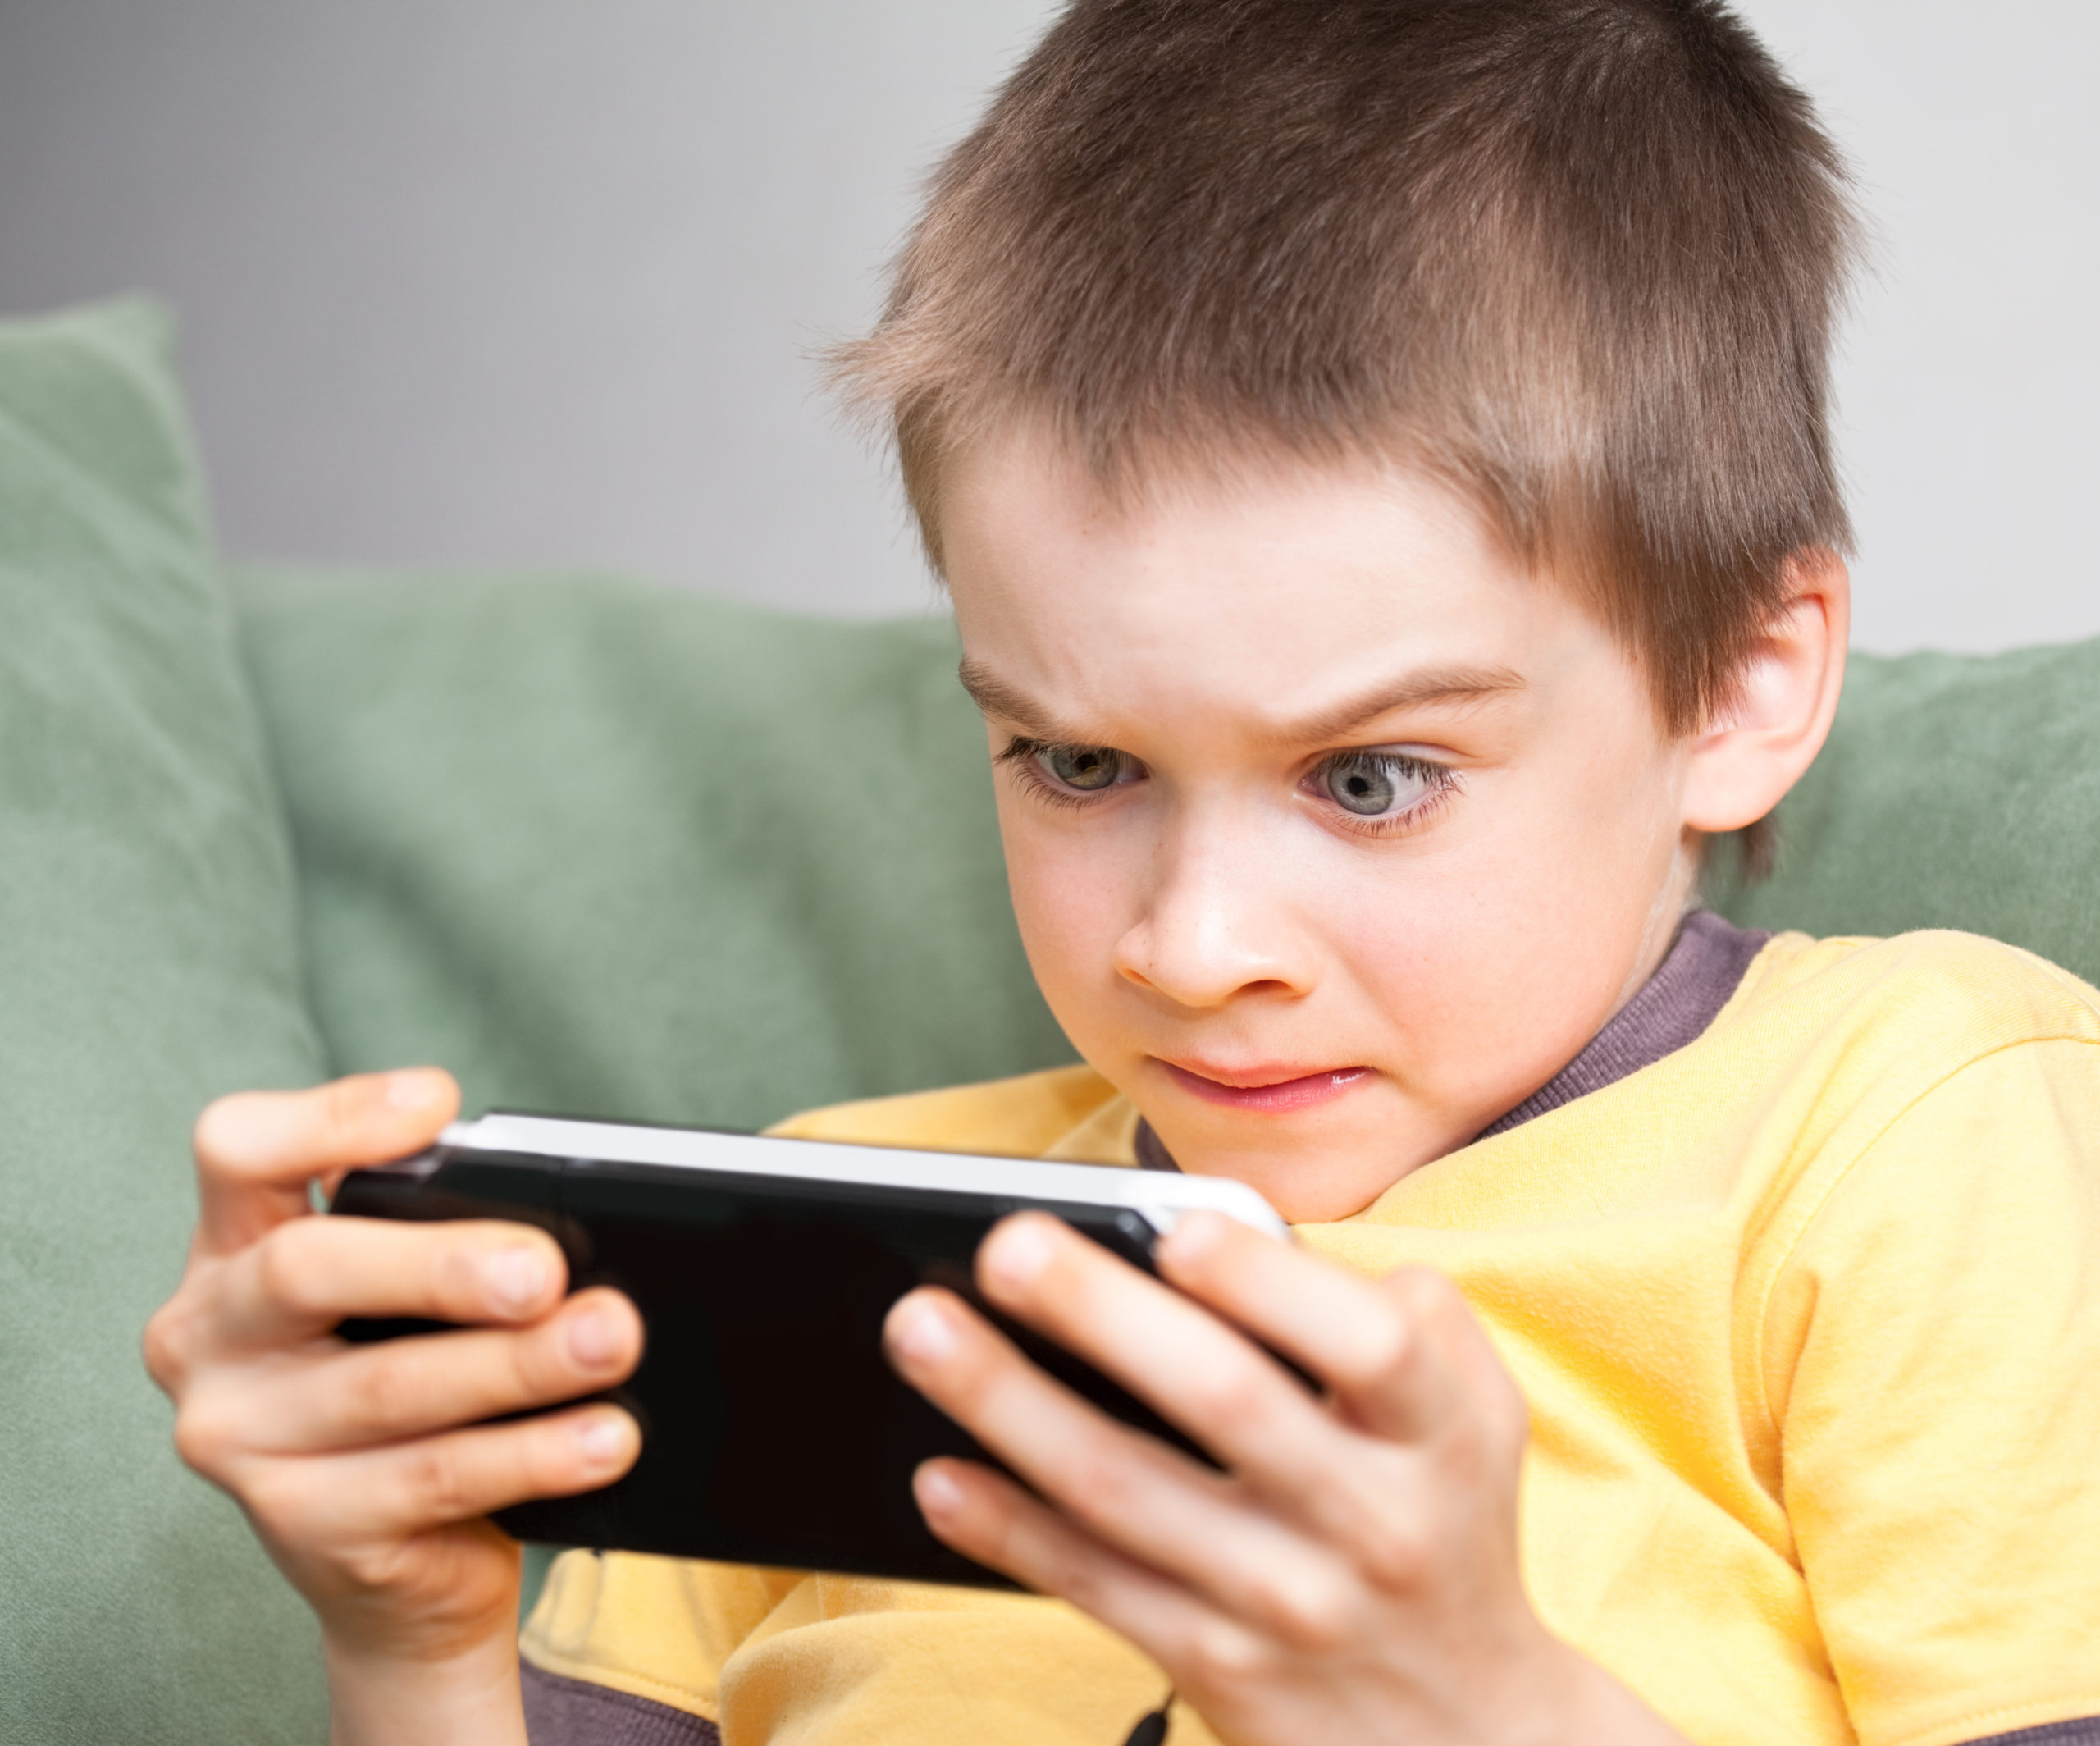 Manage screen time for kids health or Screen time can be dangerous for kids health